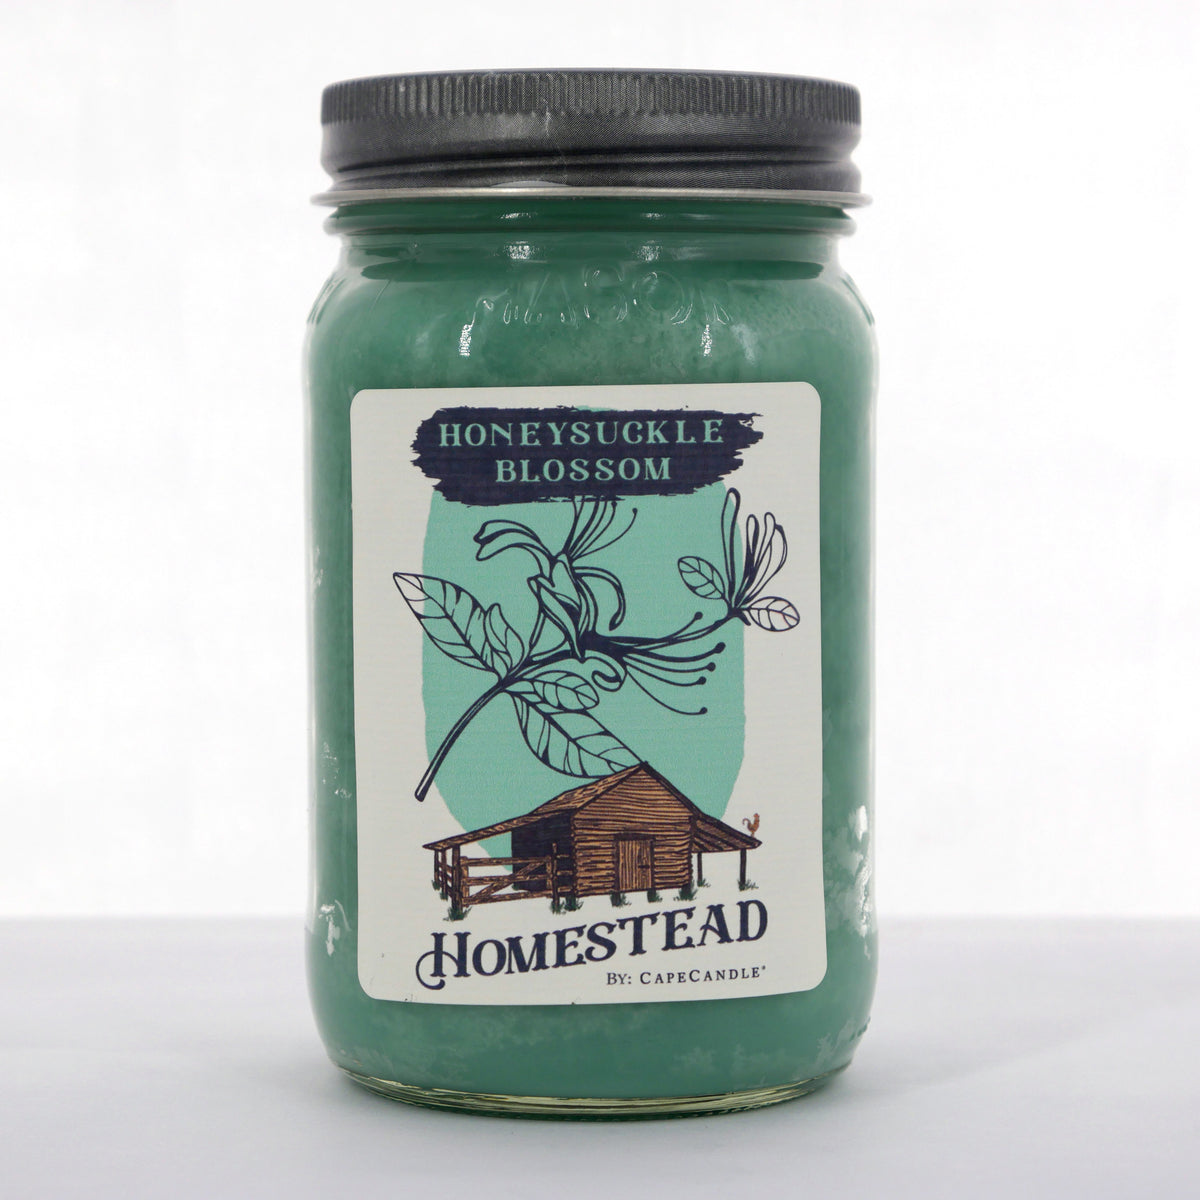 Honeysuckle Blossom Soy Candle 16oz Homestead Mason Jar by Cape Candle